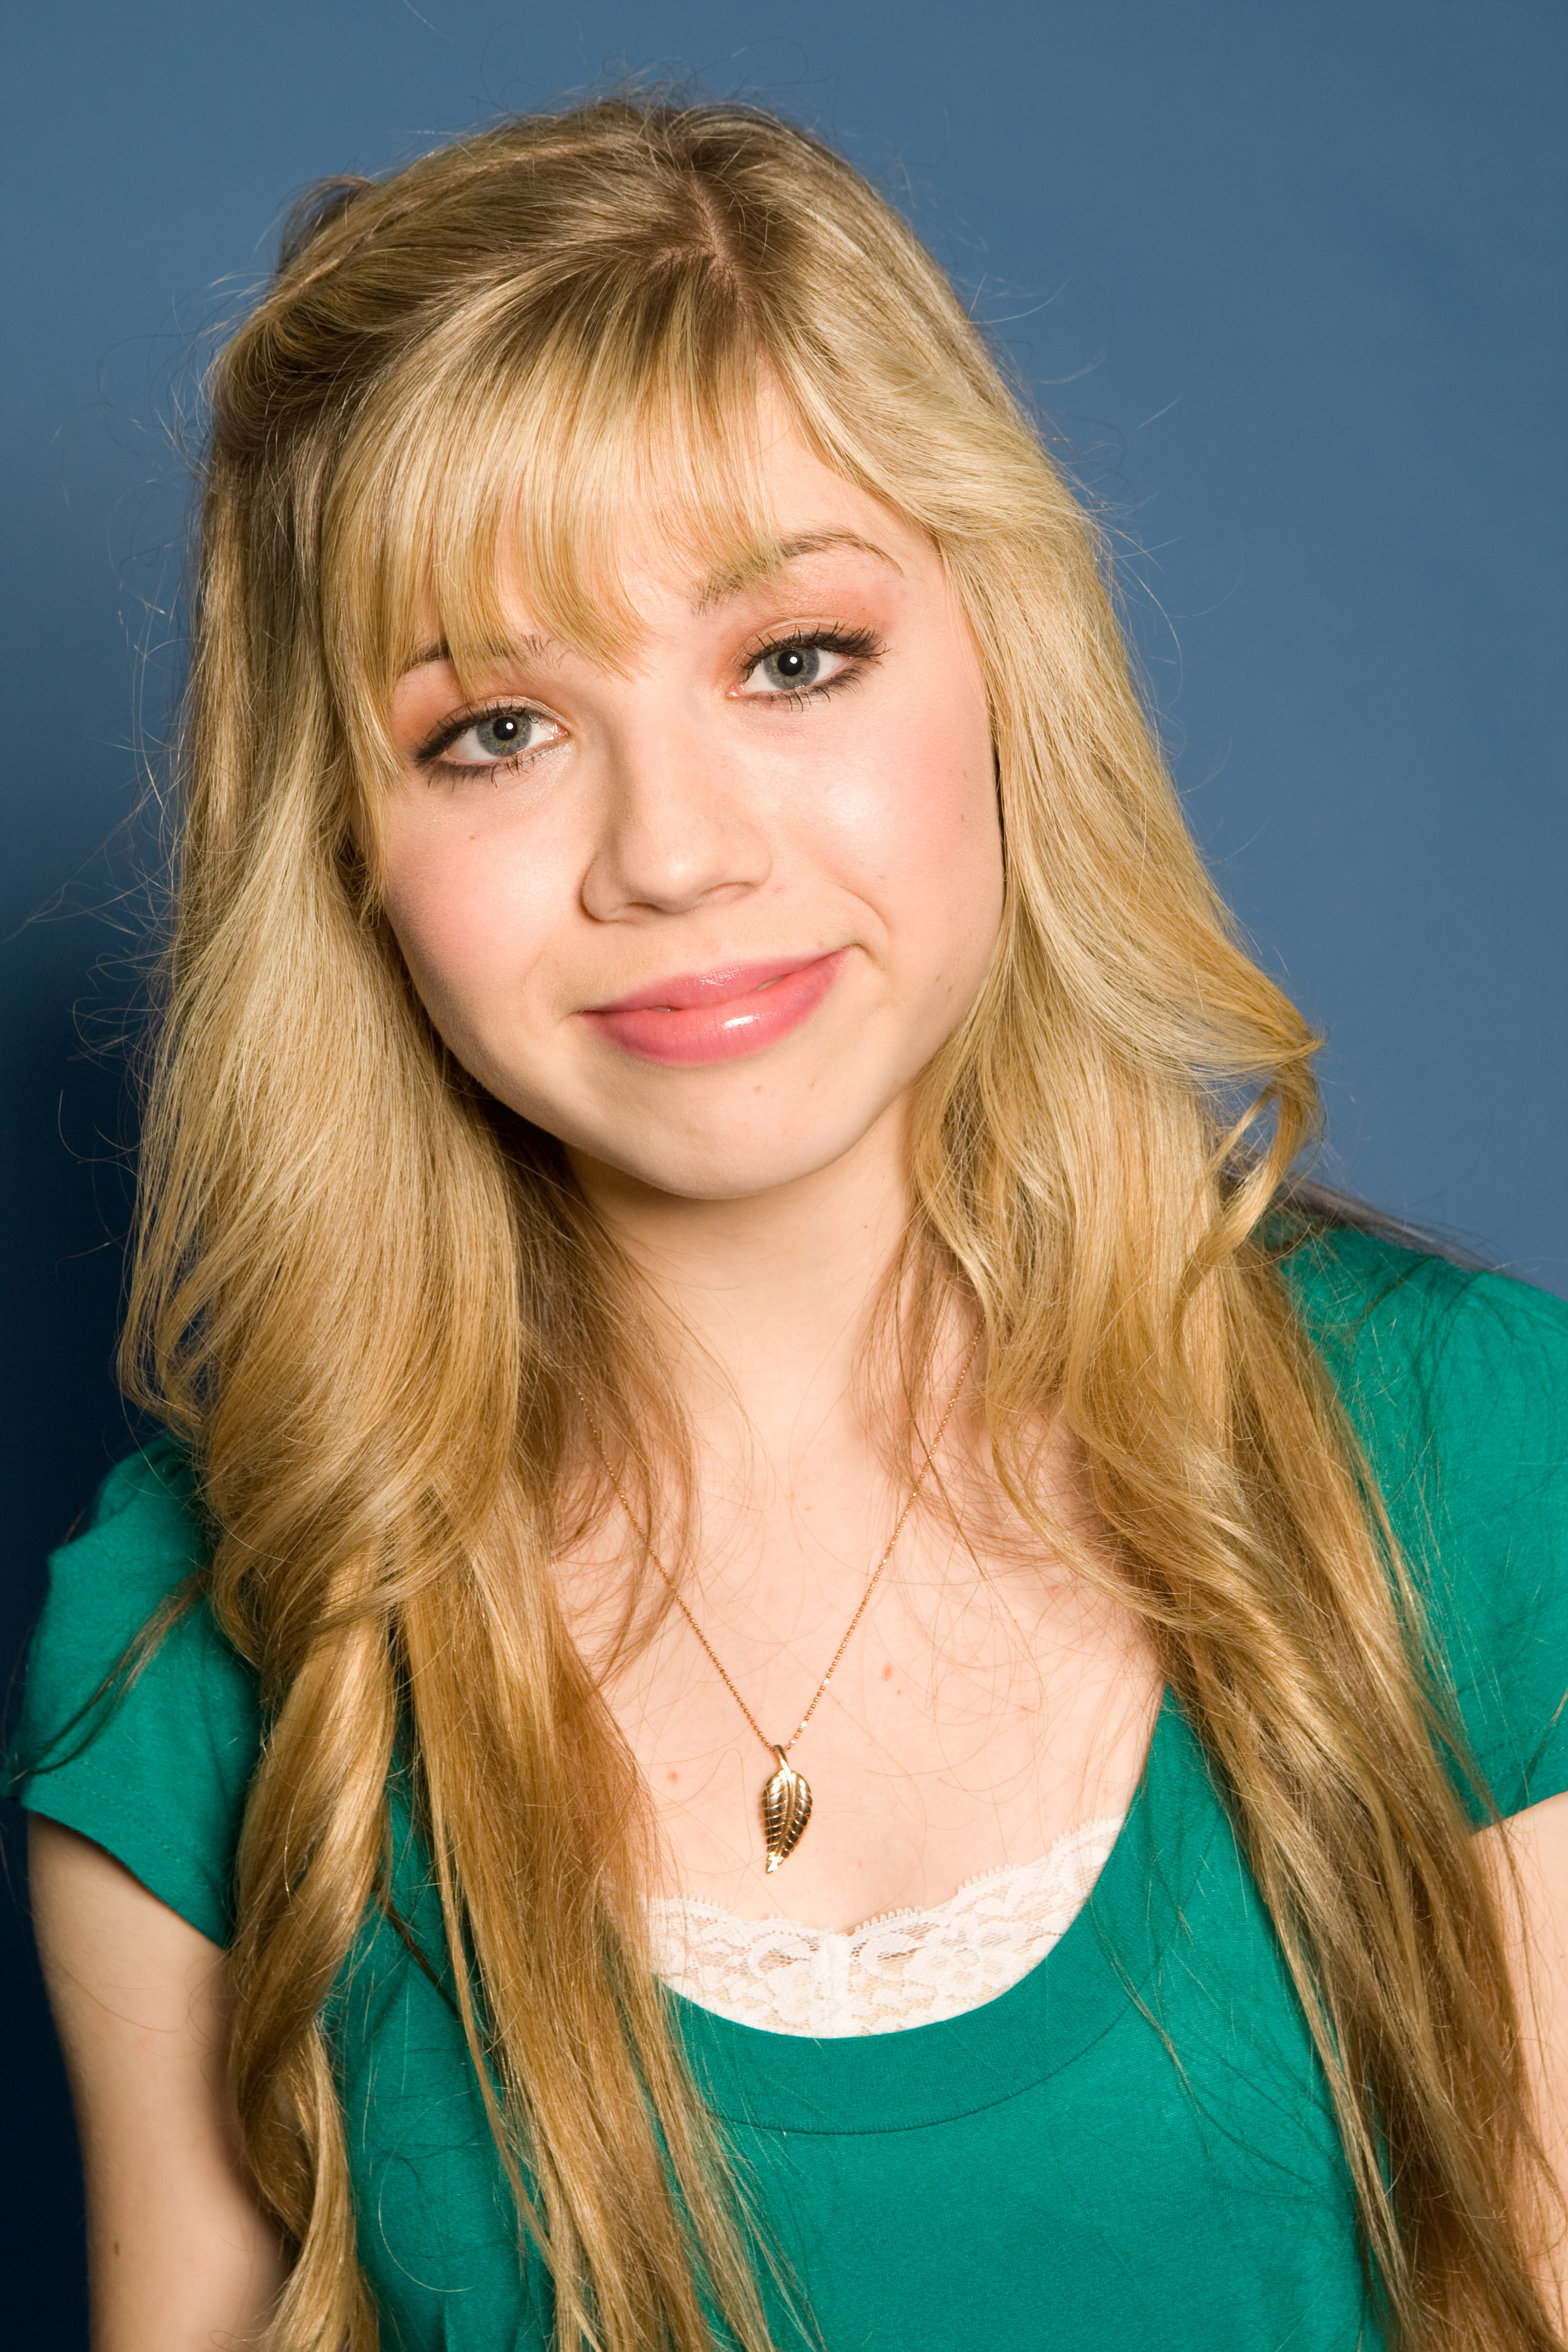 Jennette McCurdy attends the 62nd Annual Mother Goose Parade's Pre-Event "Evening With The Stars" on November 22, 2008 | Source: Getty Images